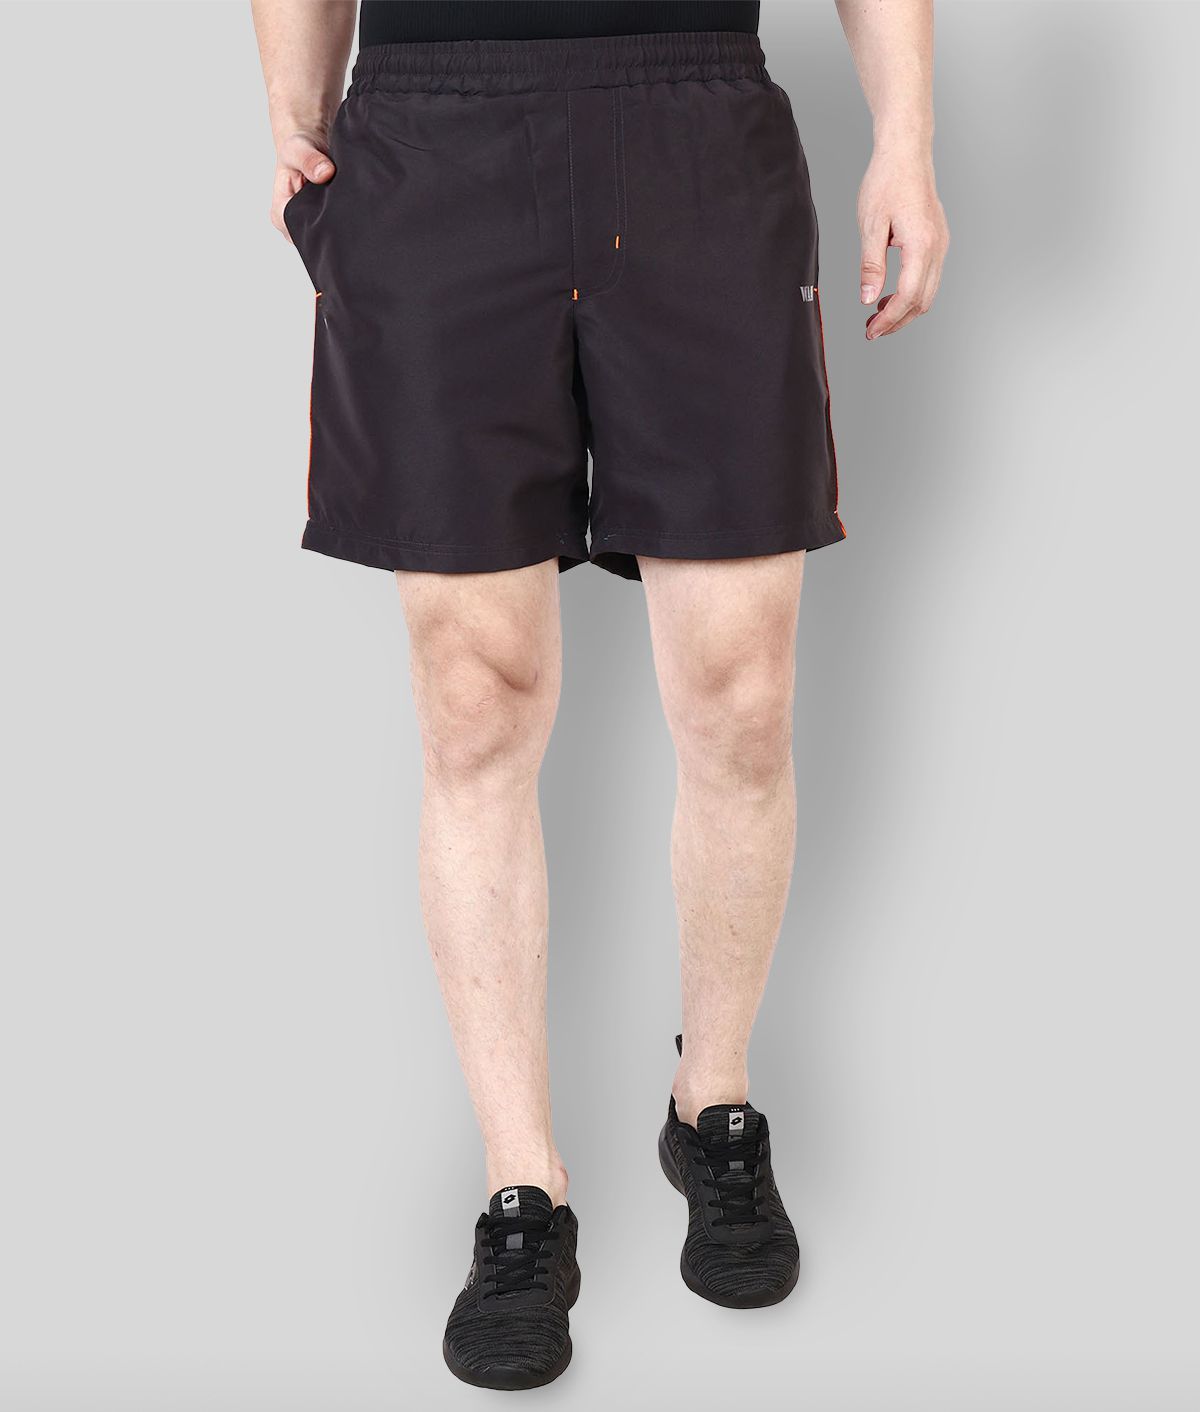 WAAW Grey Polyester Outdoor & Adventure Shorts